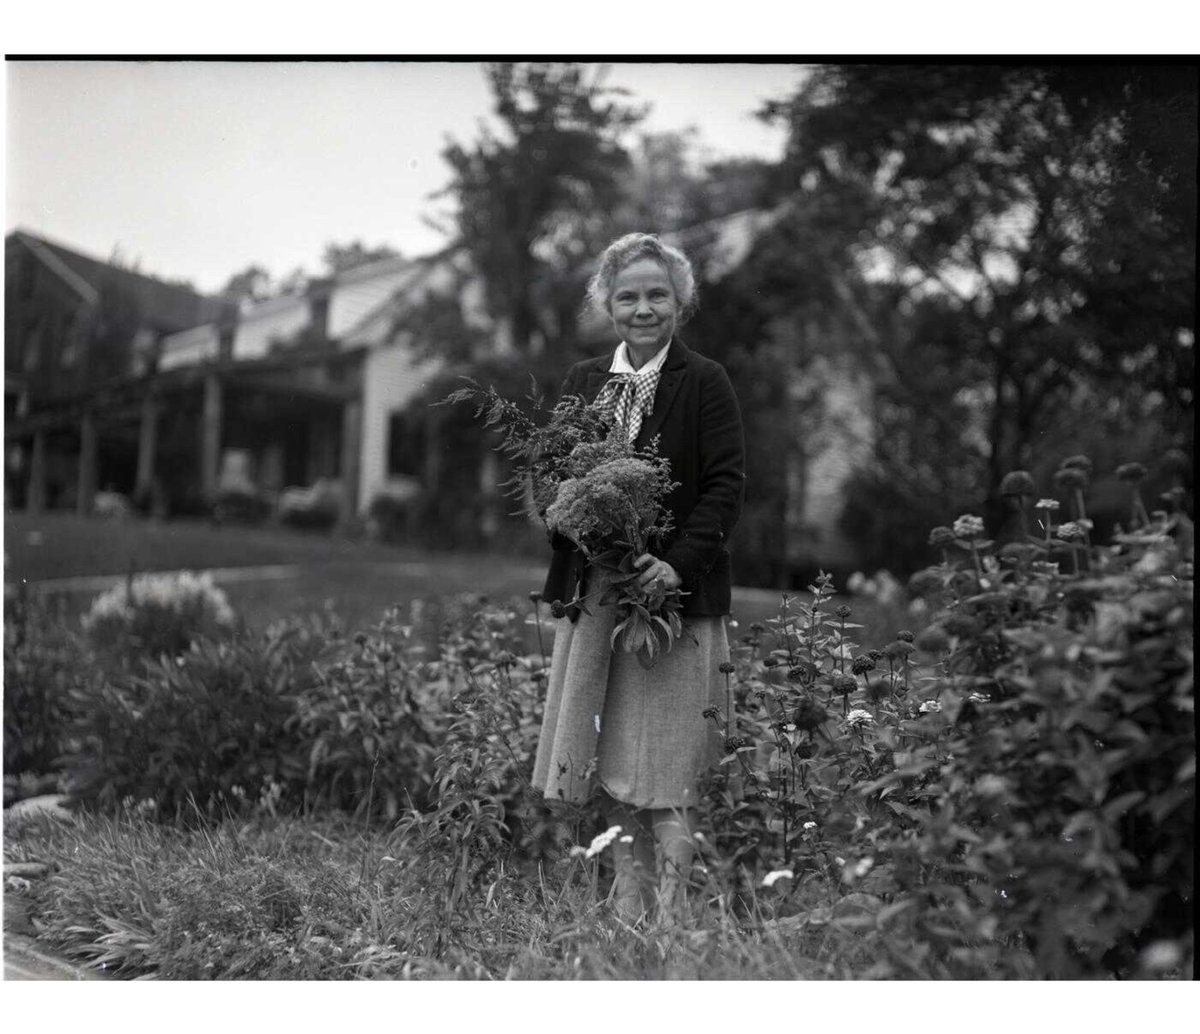 Dorothy’s fondness for Vermont & country life gave her the nickname “Vermont’s First Lady" as she often wrote about Vermont life. She also drafted an educational pamphlet “A Fair World For All” to disseminate ideas of the Universal Declaration of Human Rights more widely.